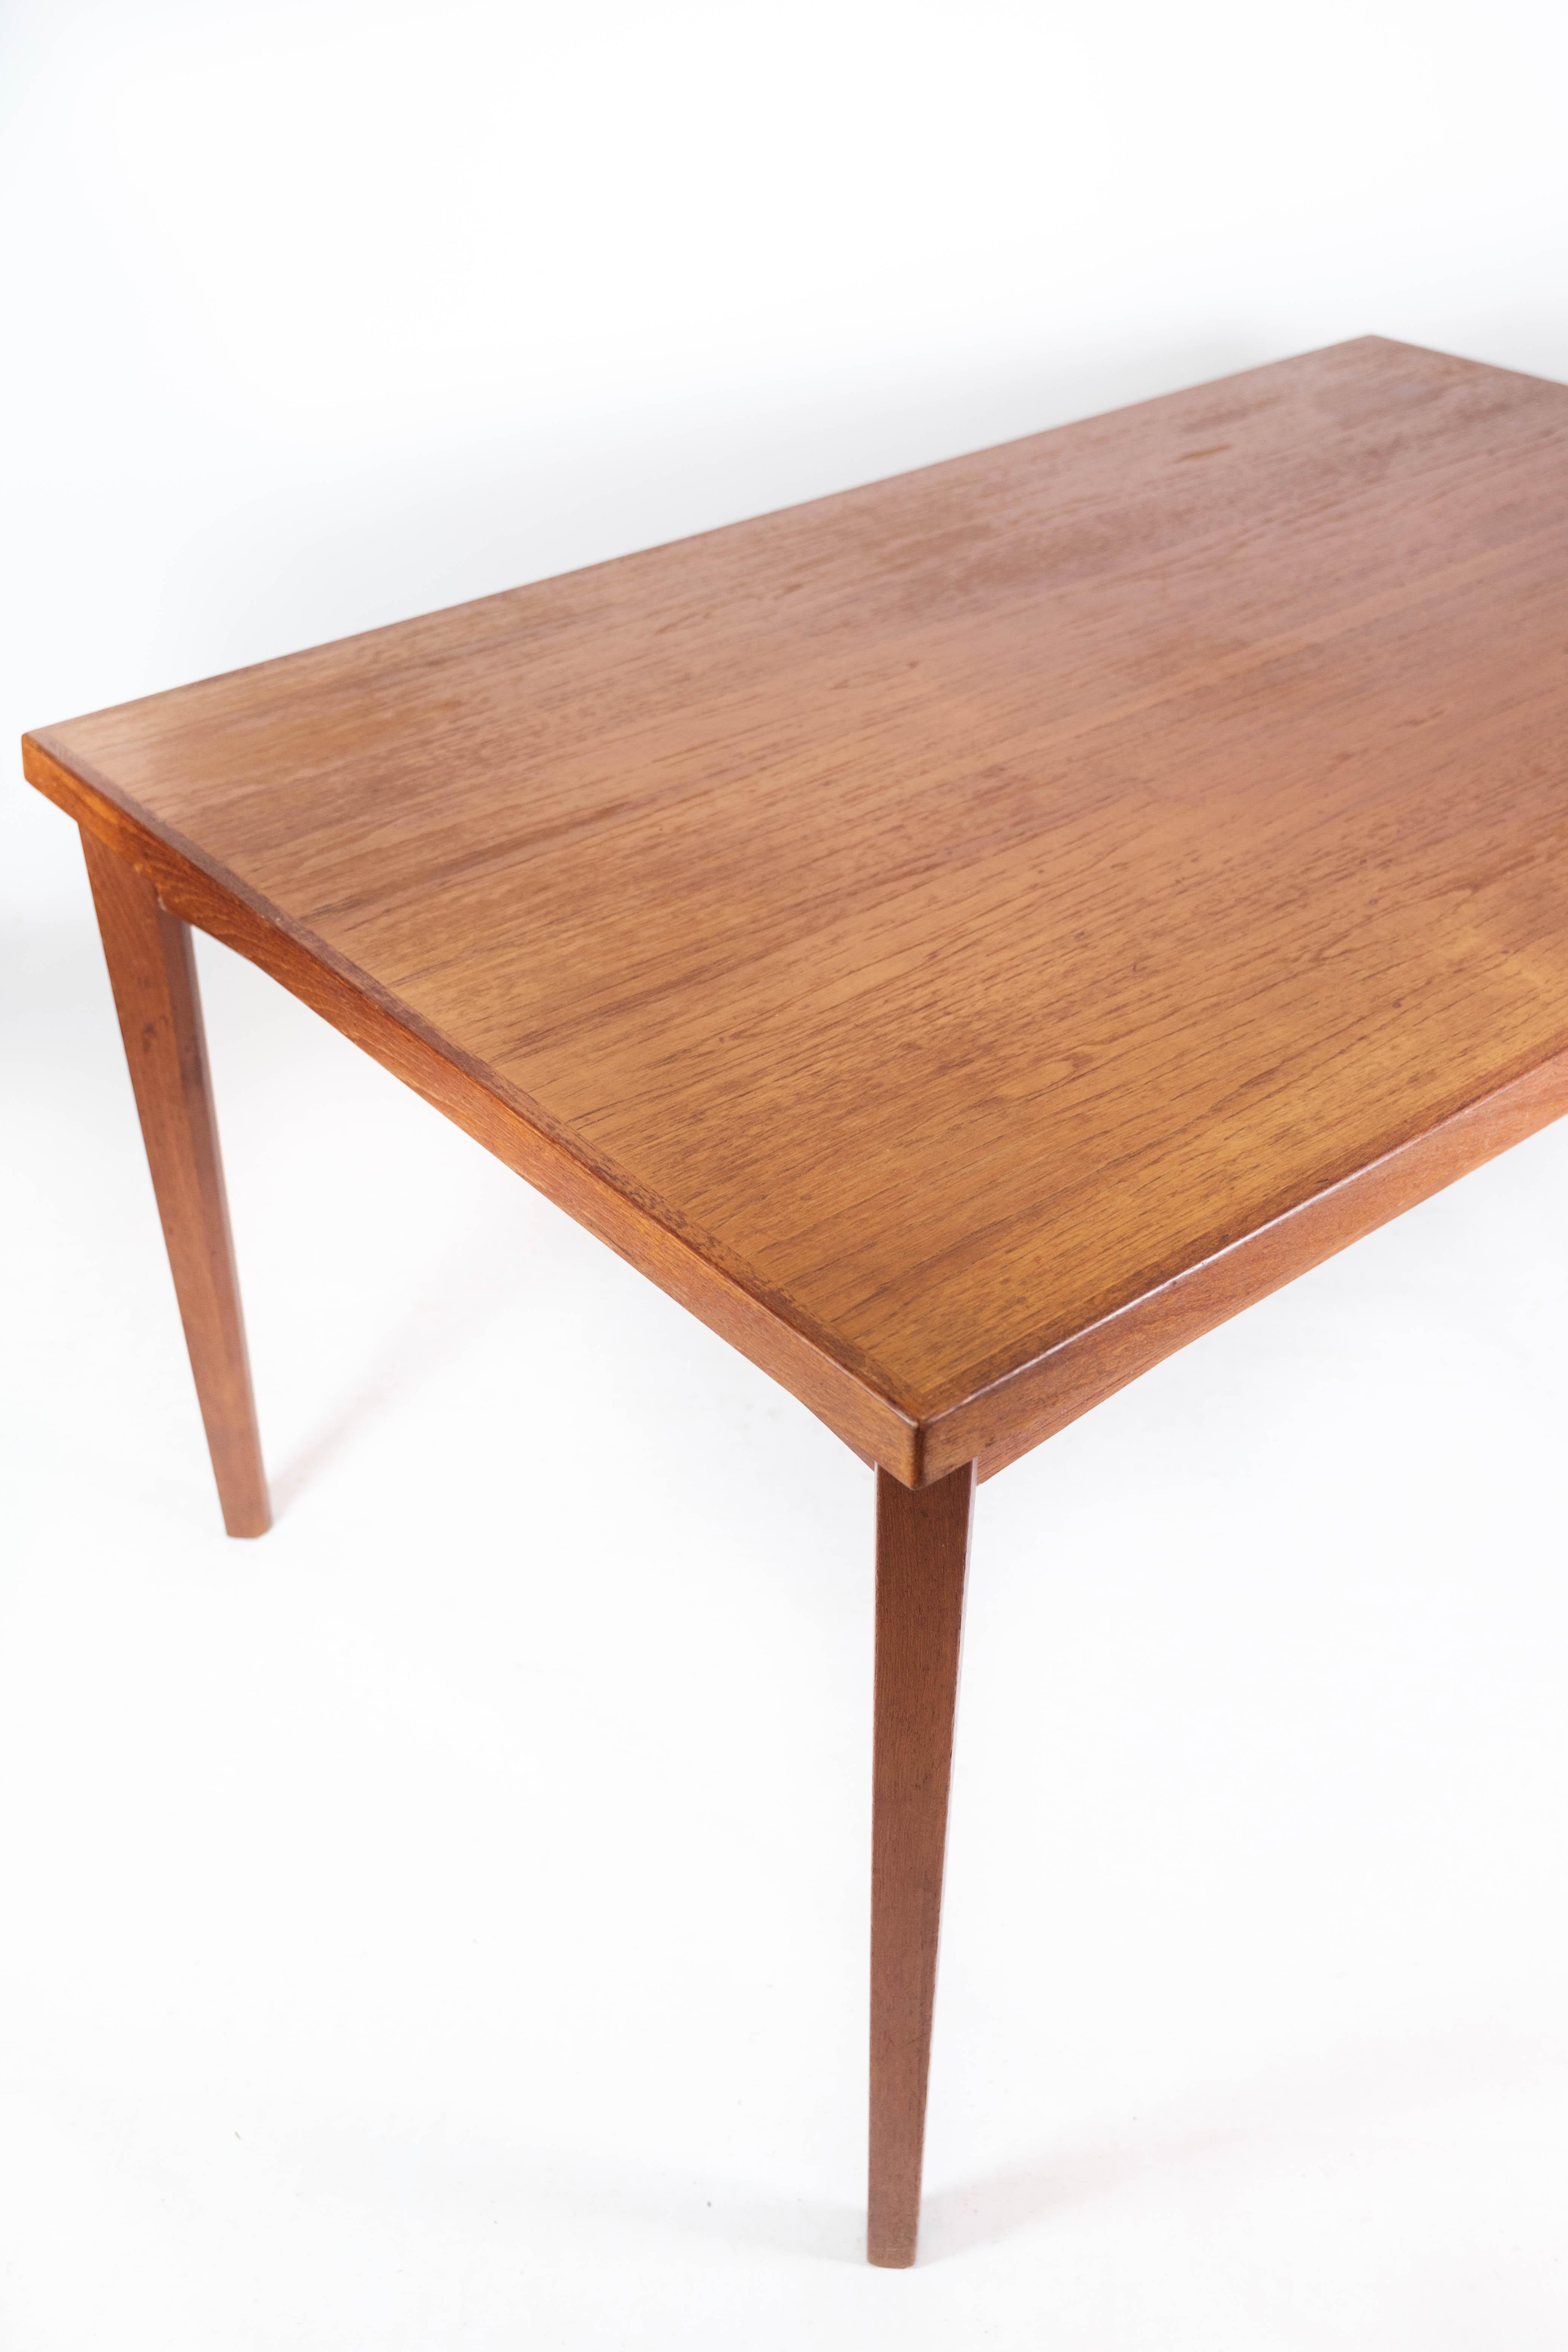 Dining Table in Teak with Extension Plates, of Danish Design from the 1960s For Sale 2